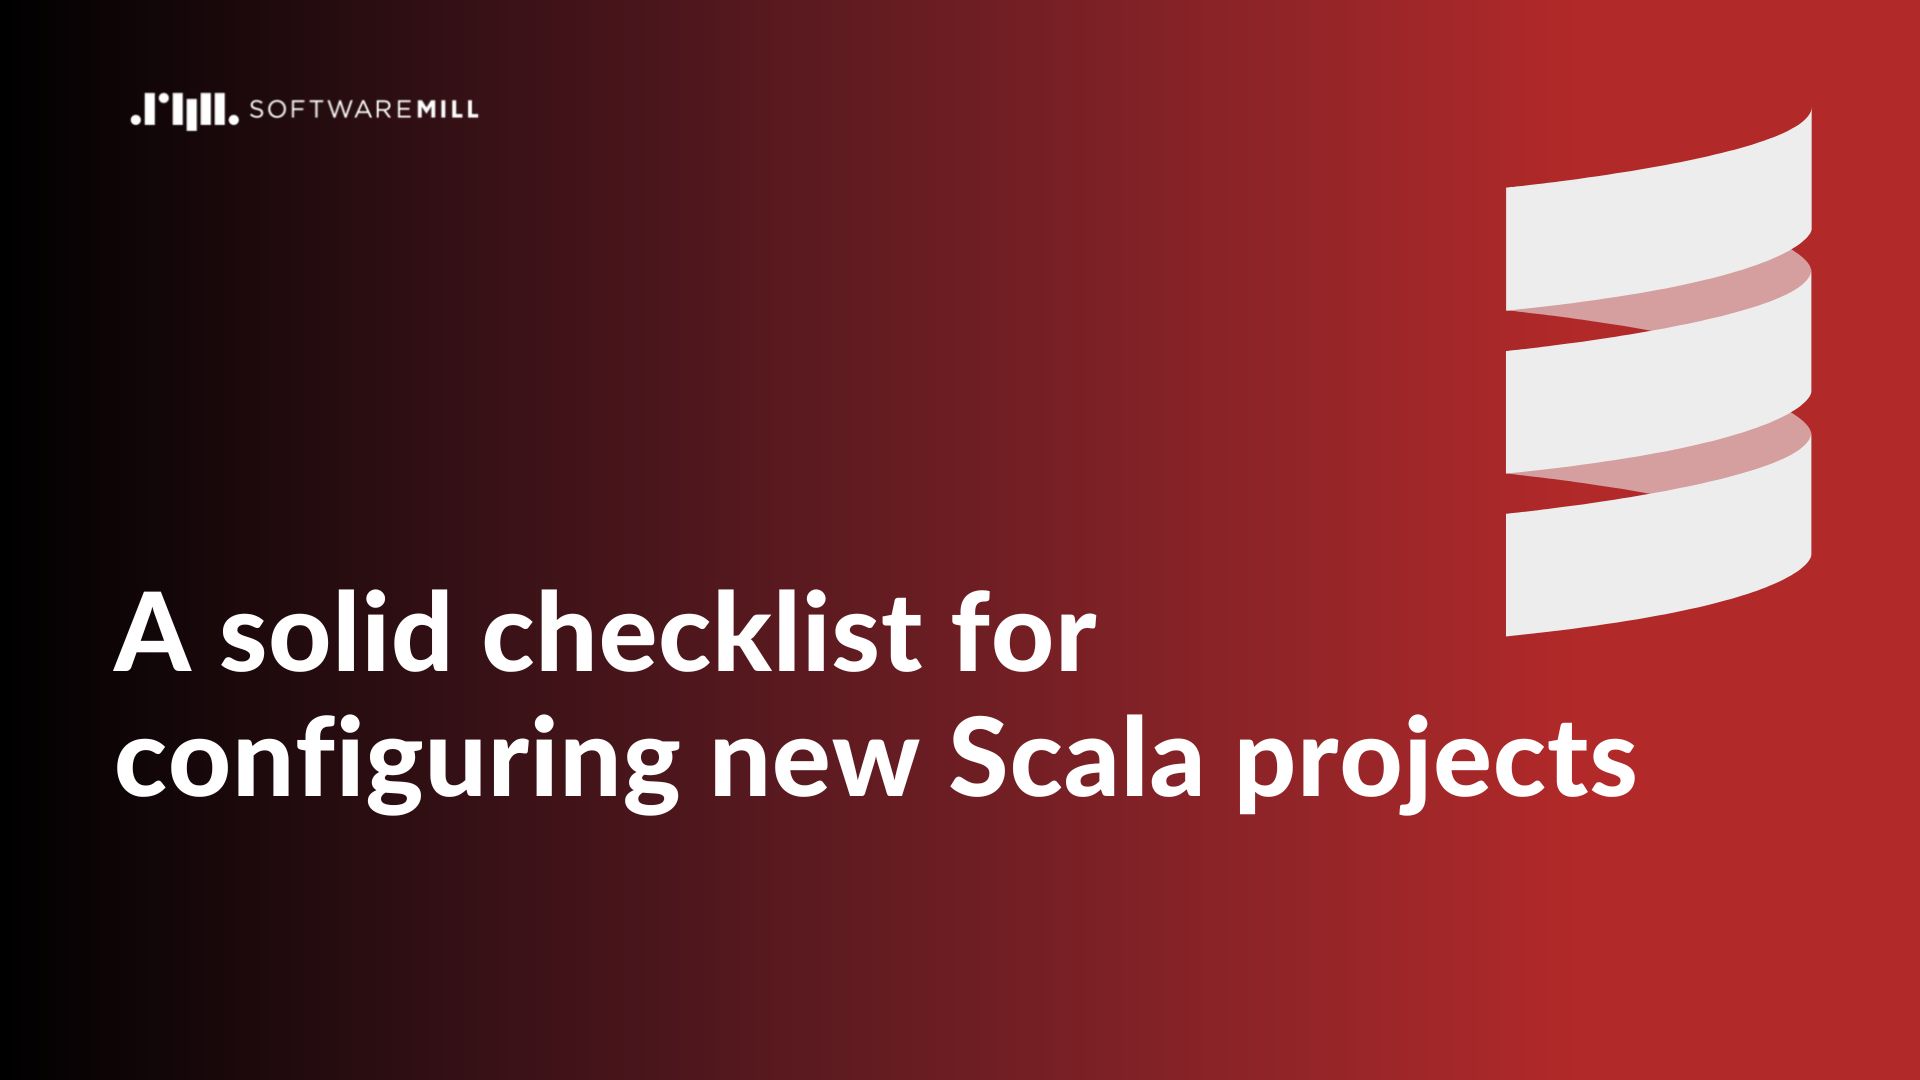 A solid checklist for configuring new Scala projects webp image